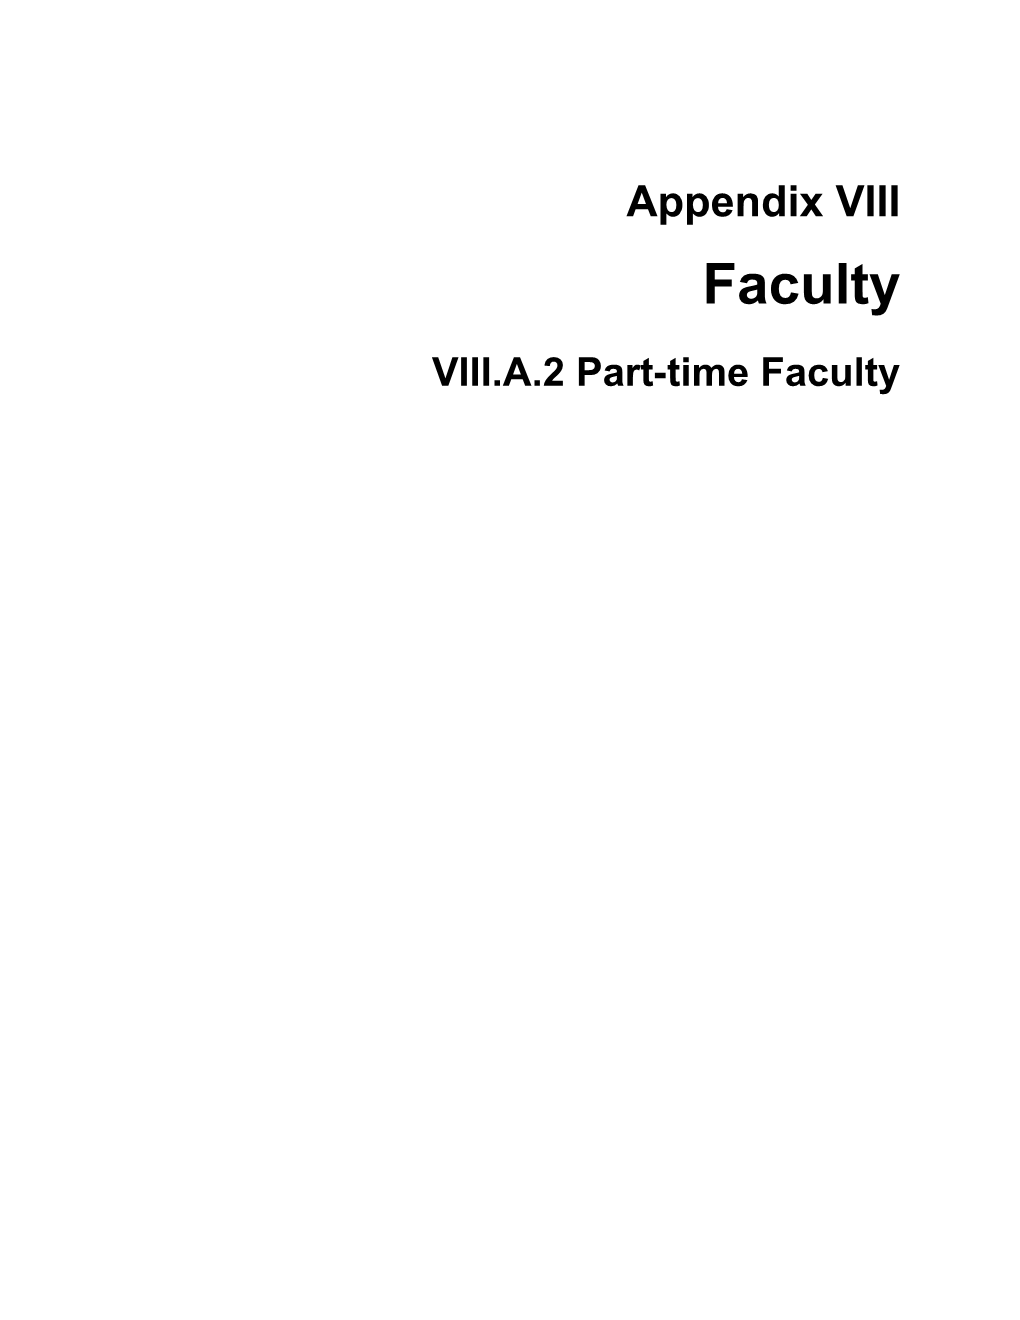 VIII.A.2 Part-Time Faculty